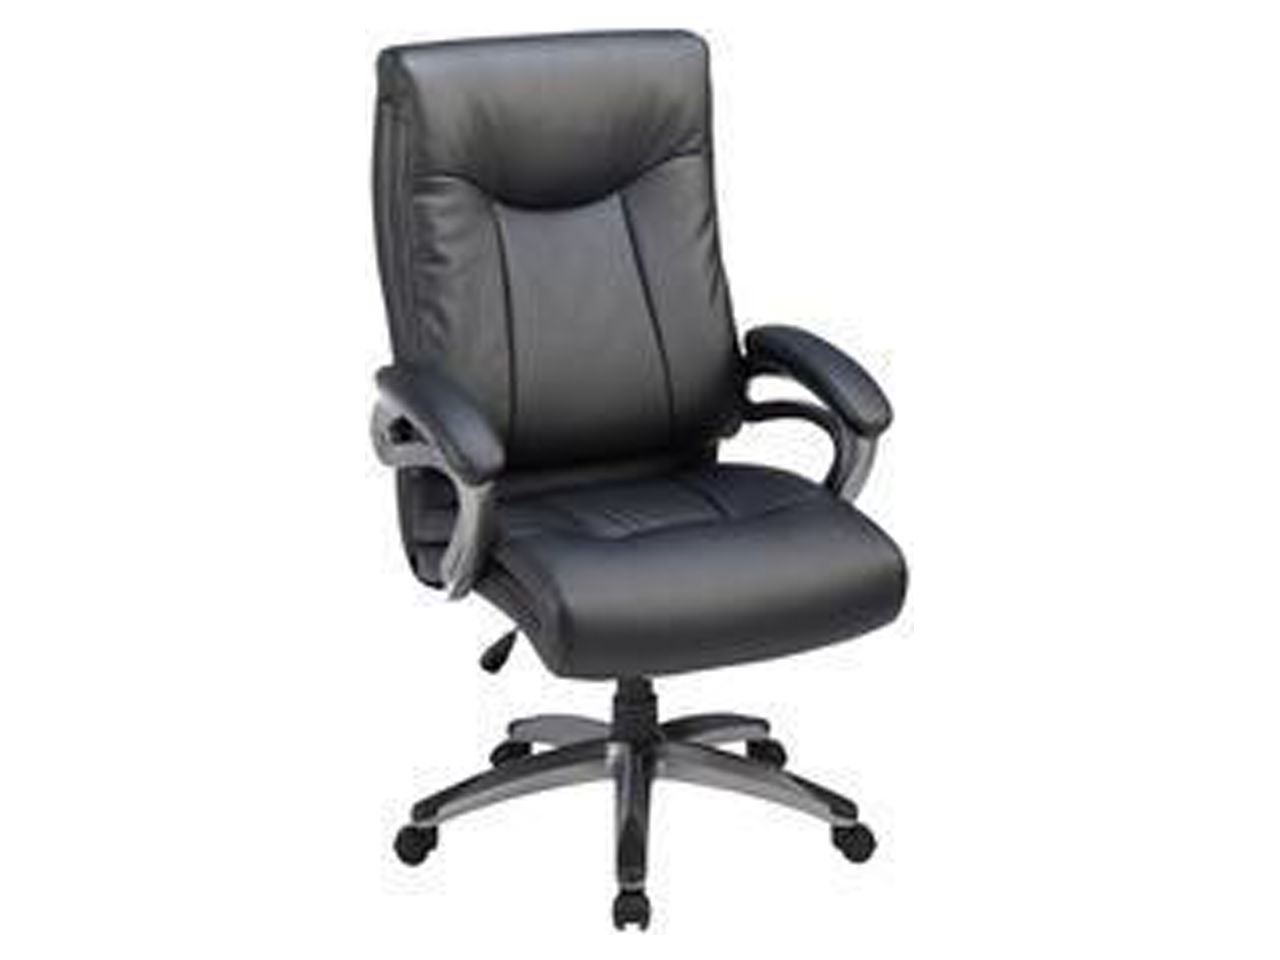 Lorell High-Back Exec Chair Leather 27"x30"x46-1/2" BK 69516 - image 5 of 7